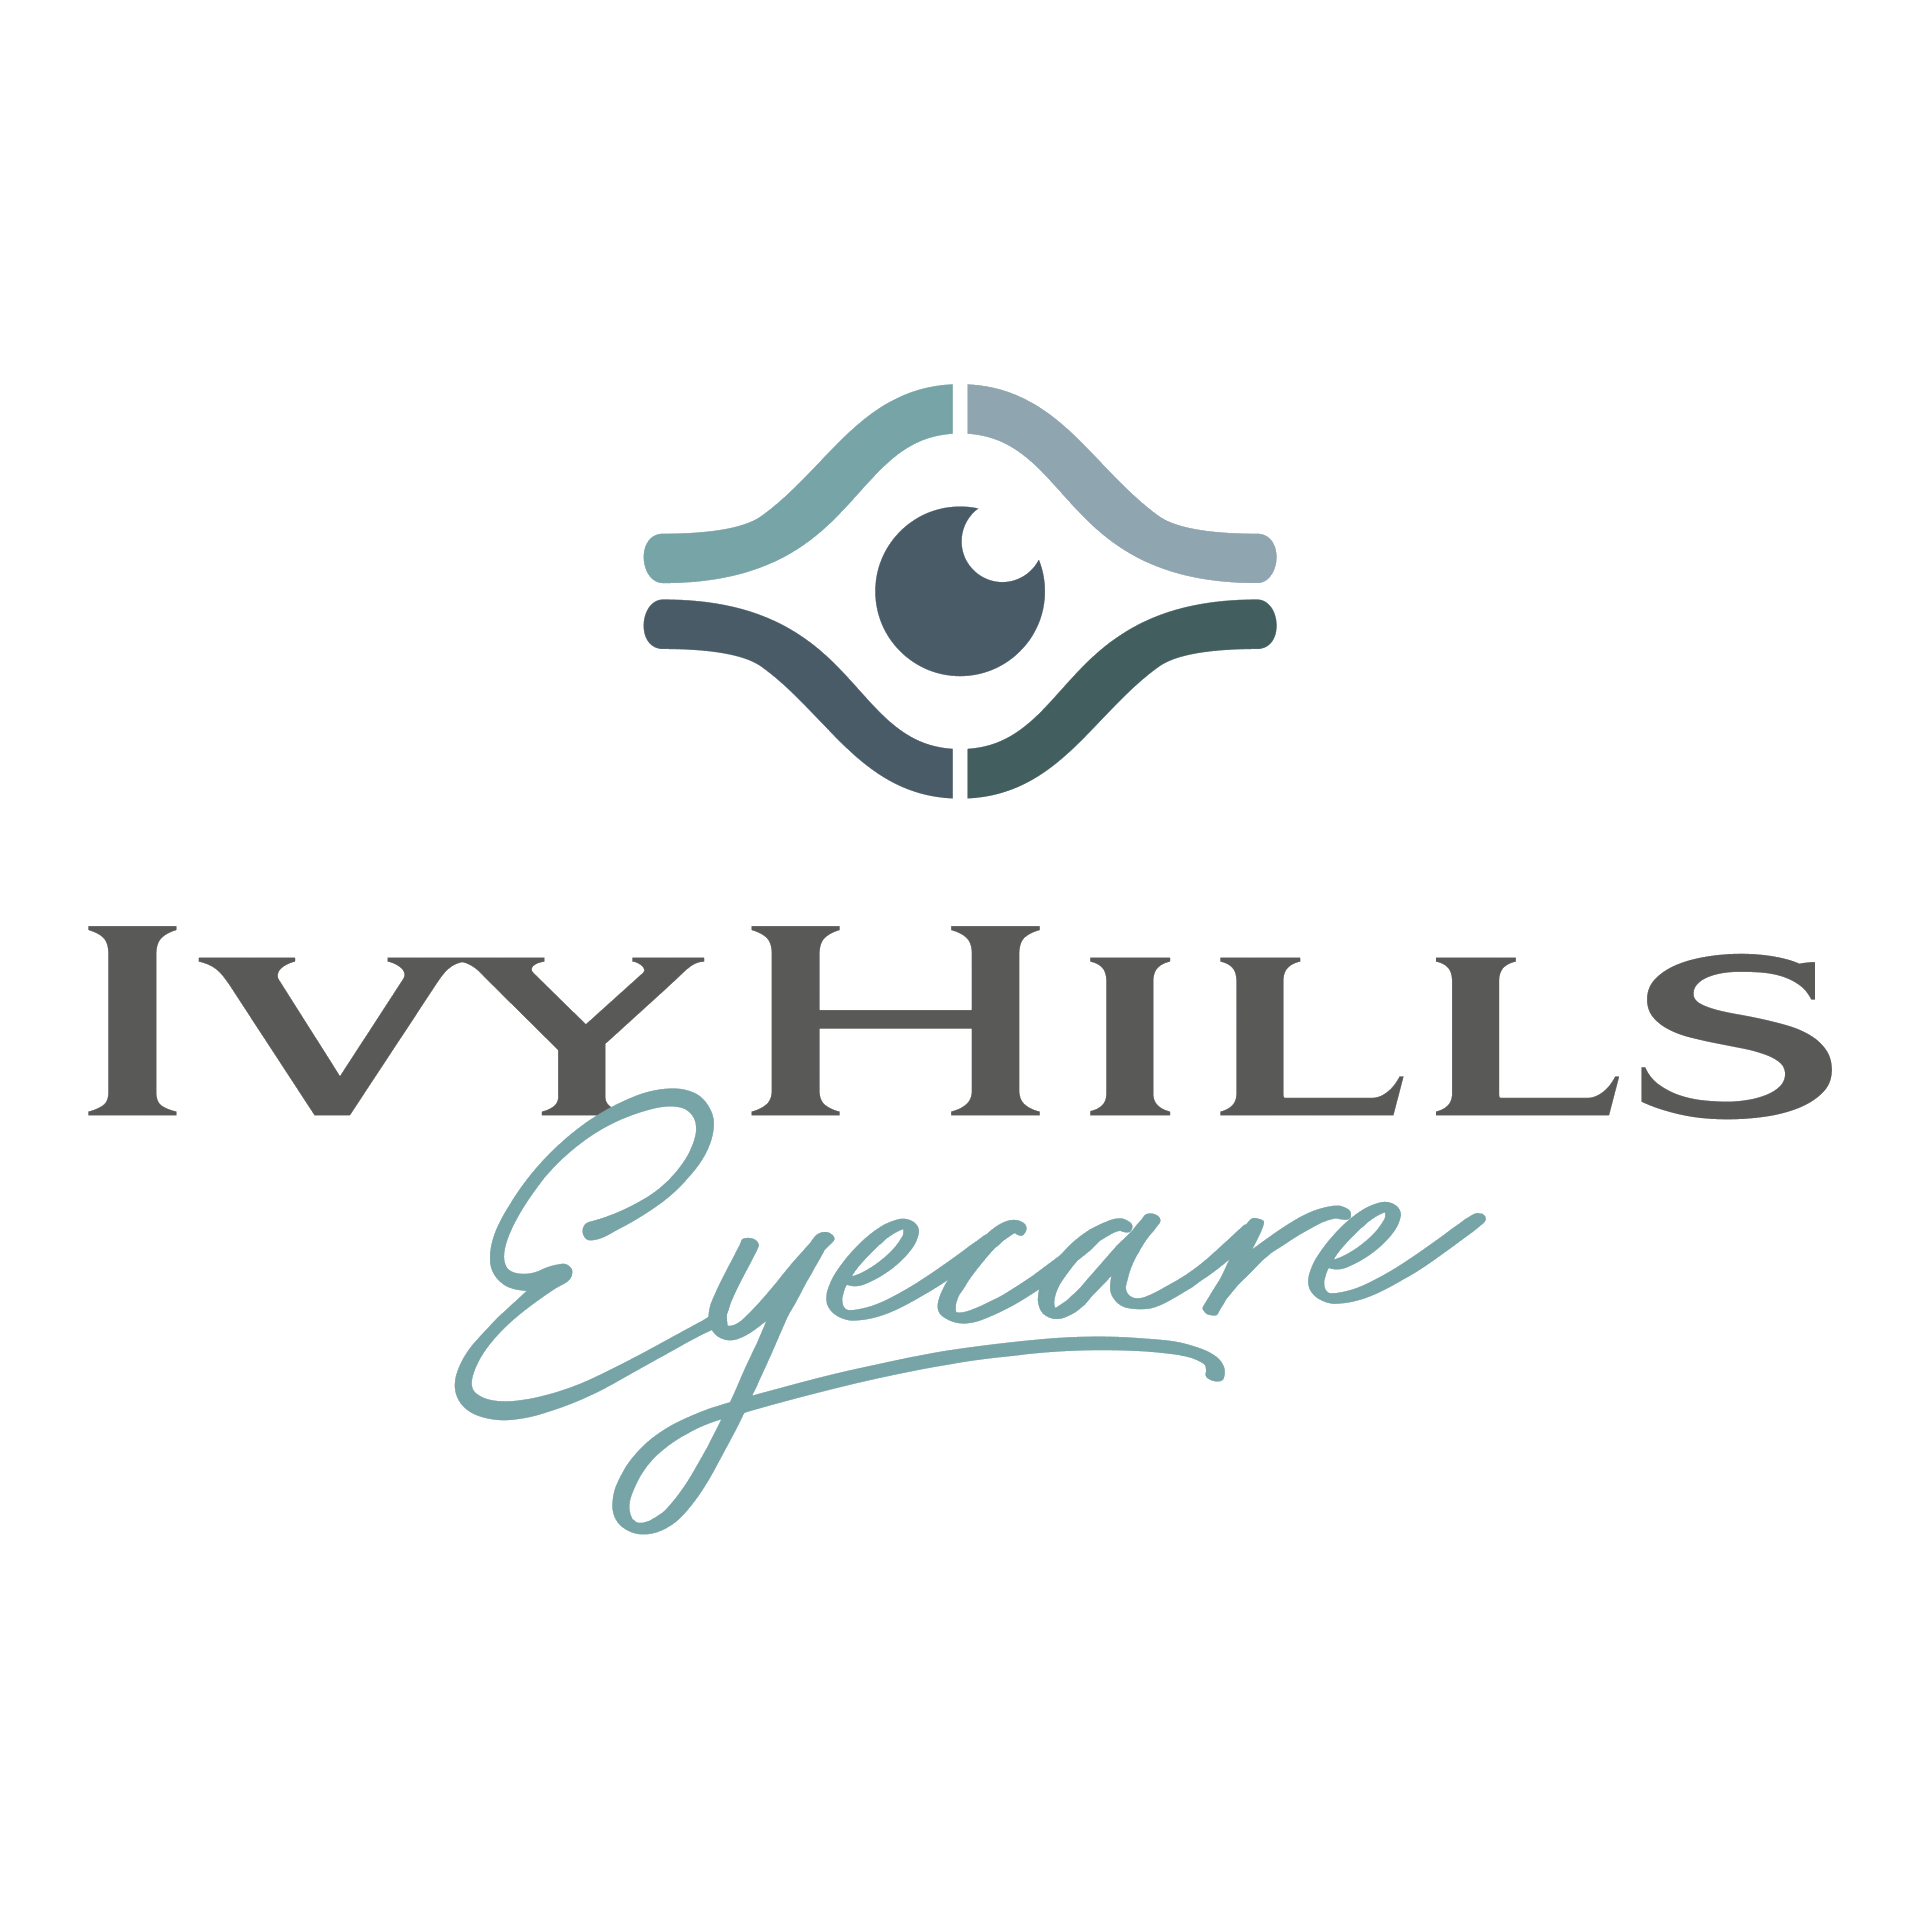 Ivy Hills Eyecare - Newtown, OH 45244 - (513)991-7090 | ShowMeLocal.com